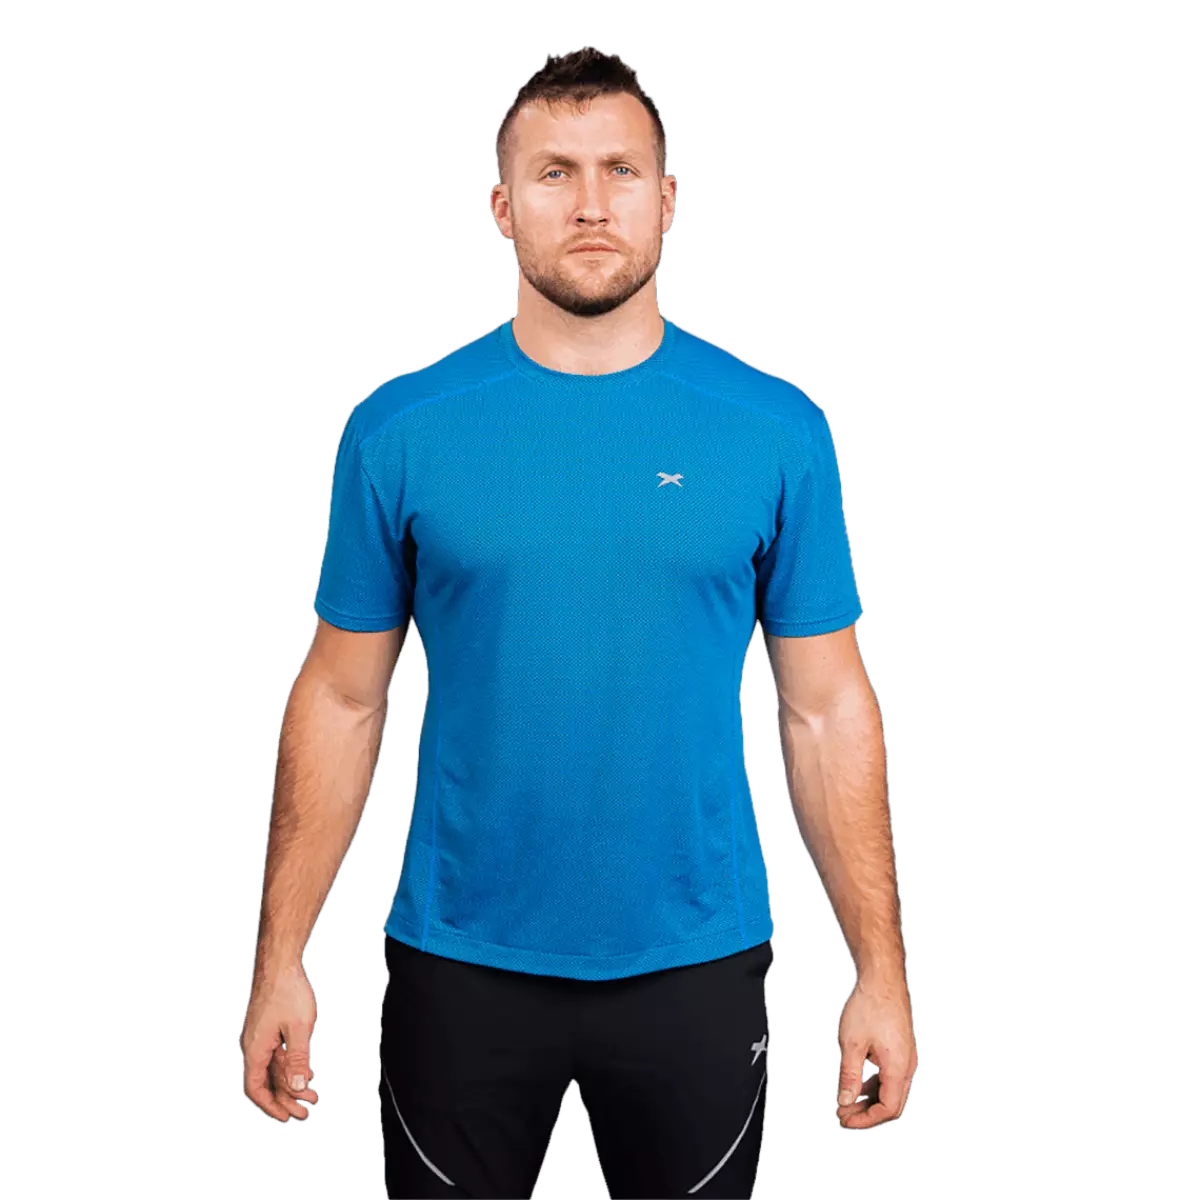 Male model in cobalt blue short sleeve shirt with reflective Xenith-X logo, from front.